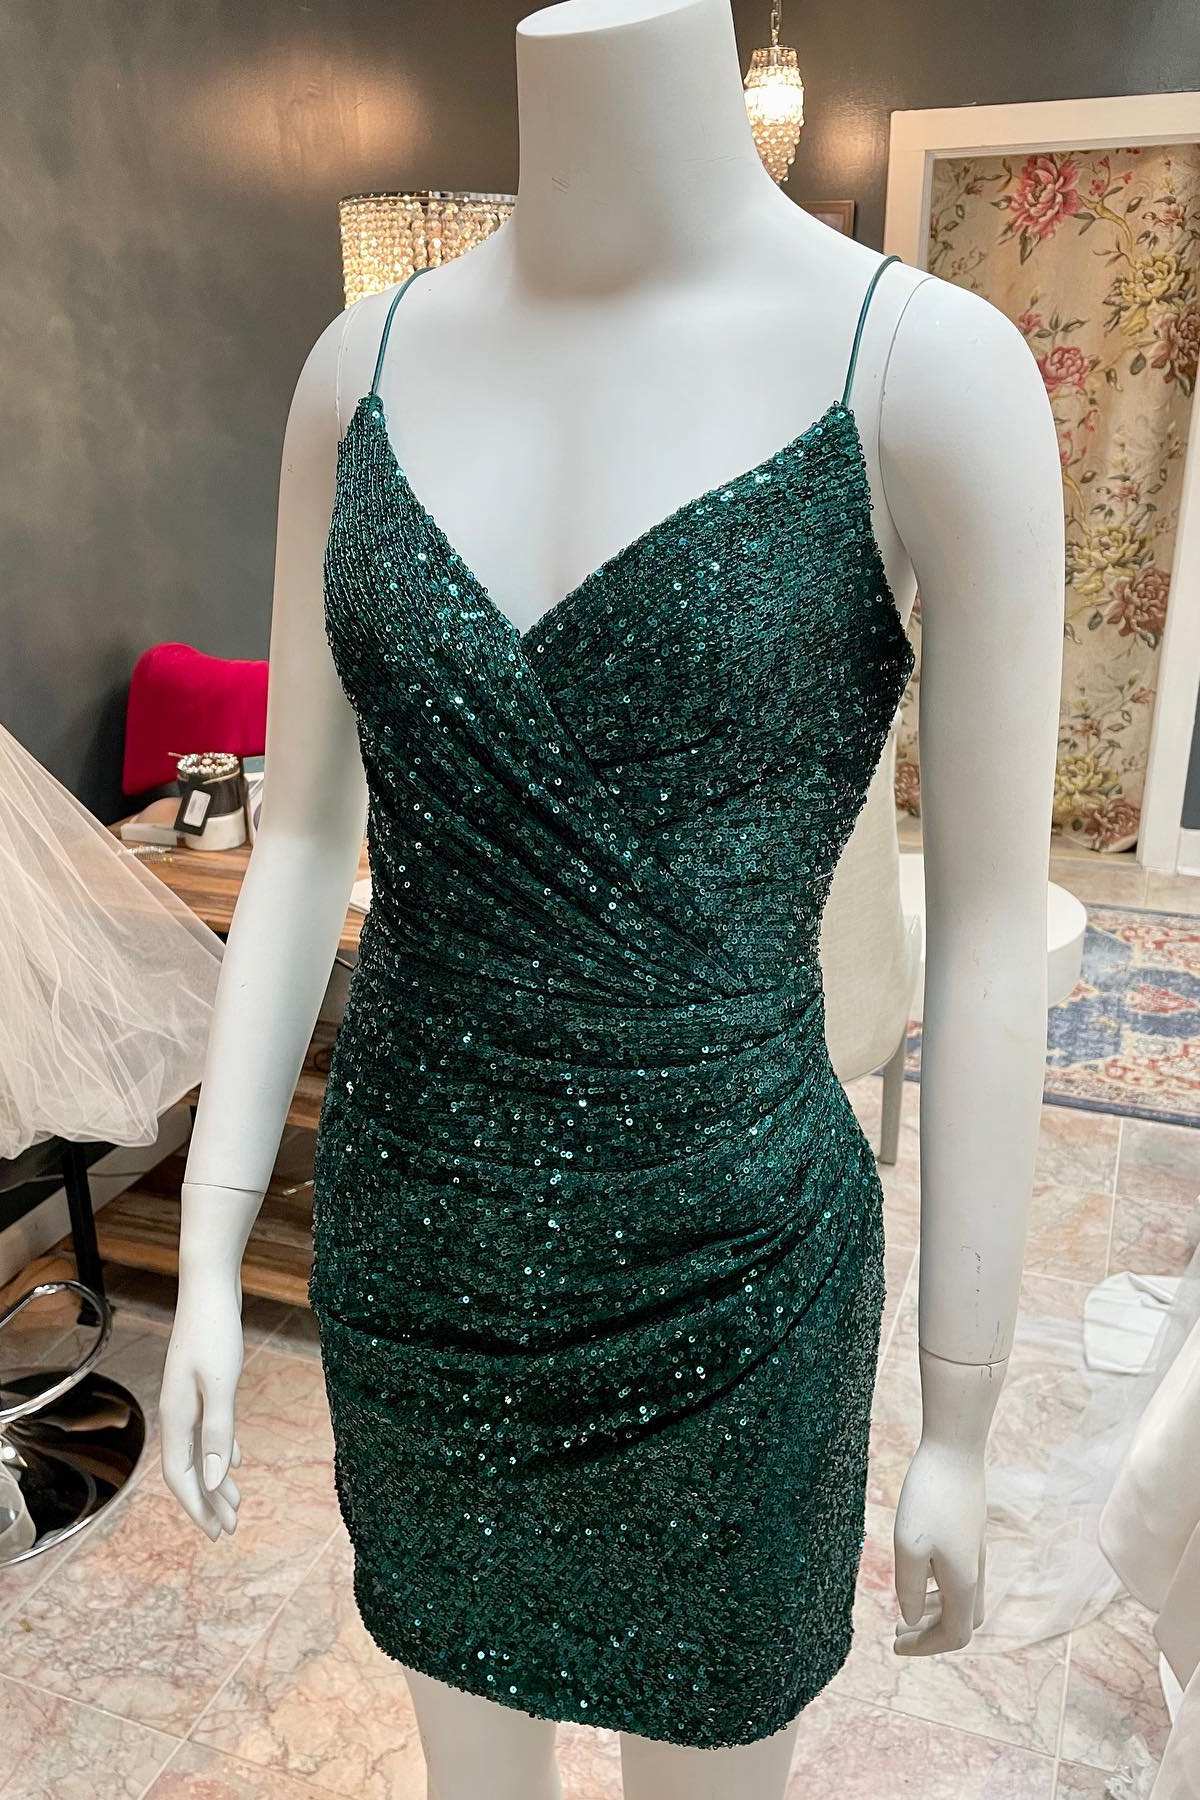 Homecoming Dresses Blue, Dark Green Sequin Spaghetti Straps Ruched Cocktail Dress,Mini Prom Dresses